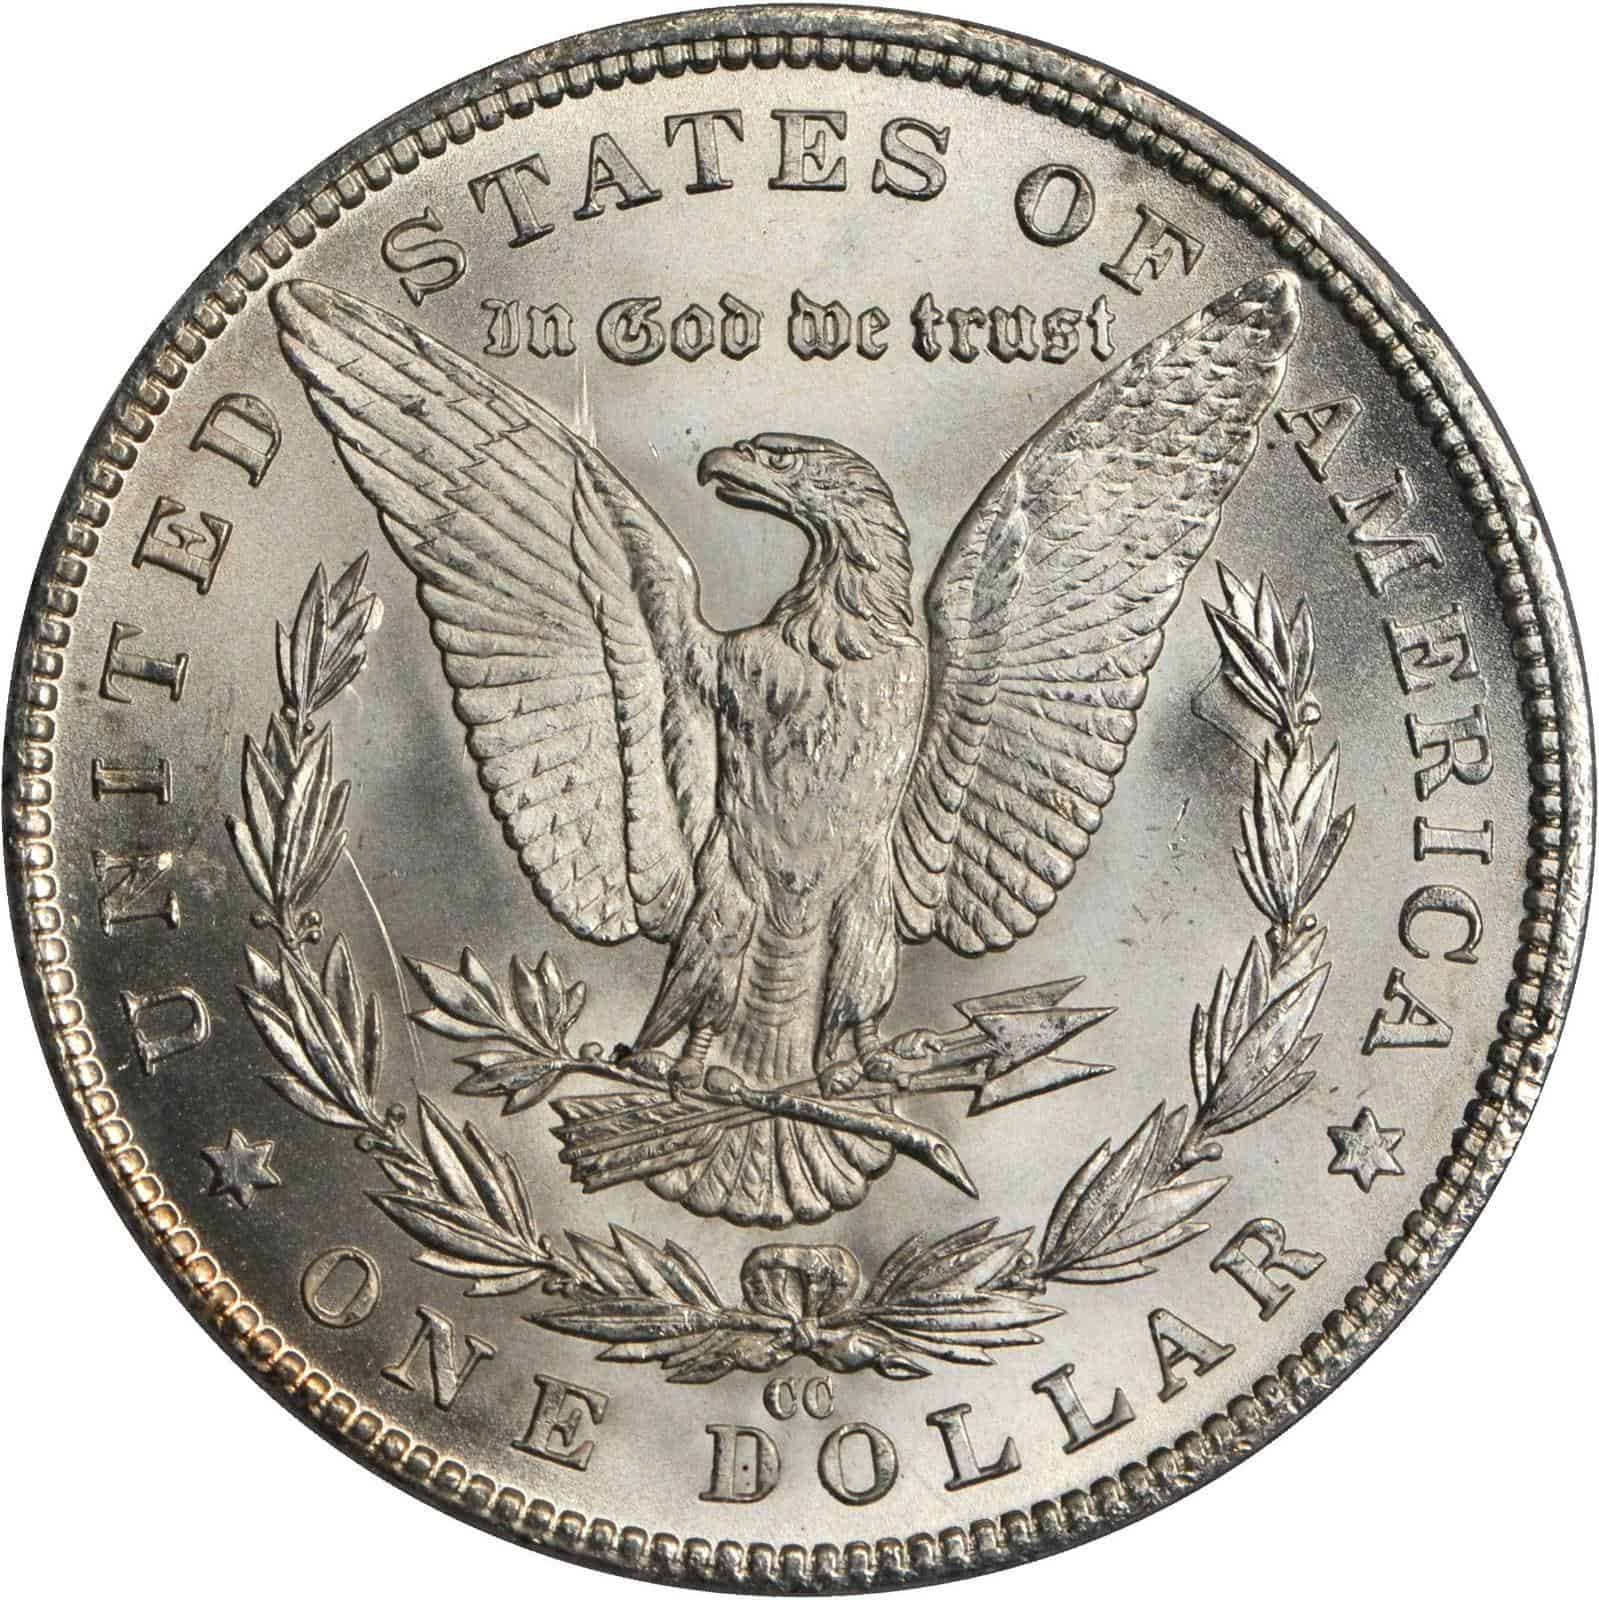 The Reverse of the 1884 Silver Dollar